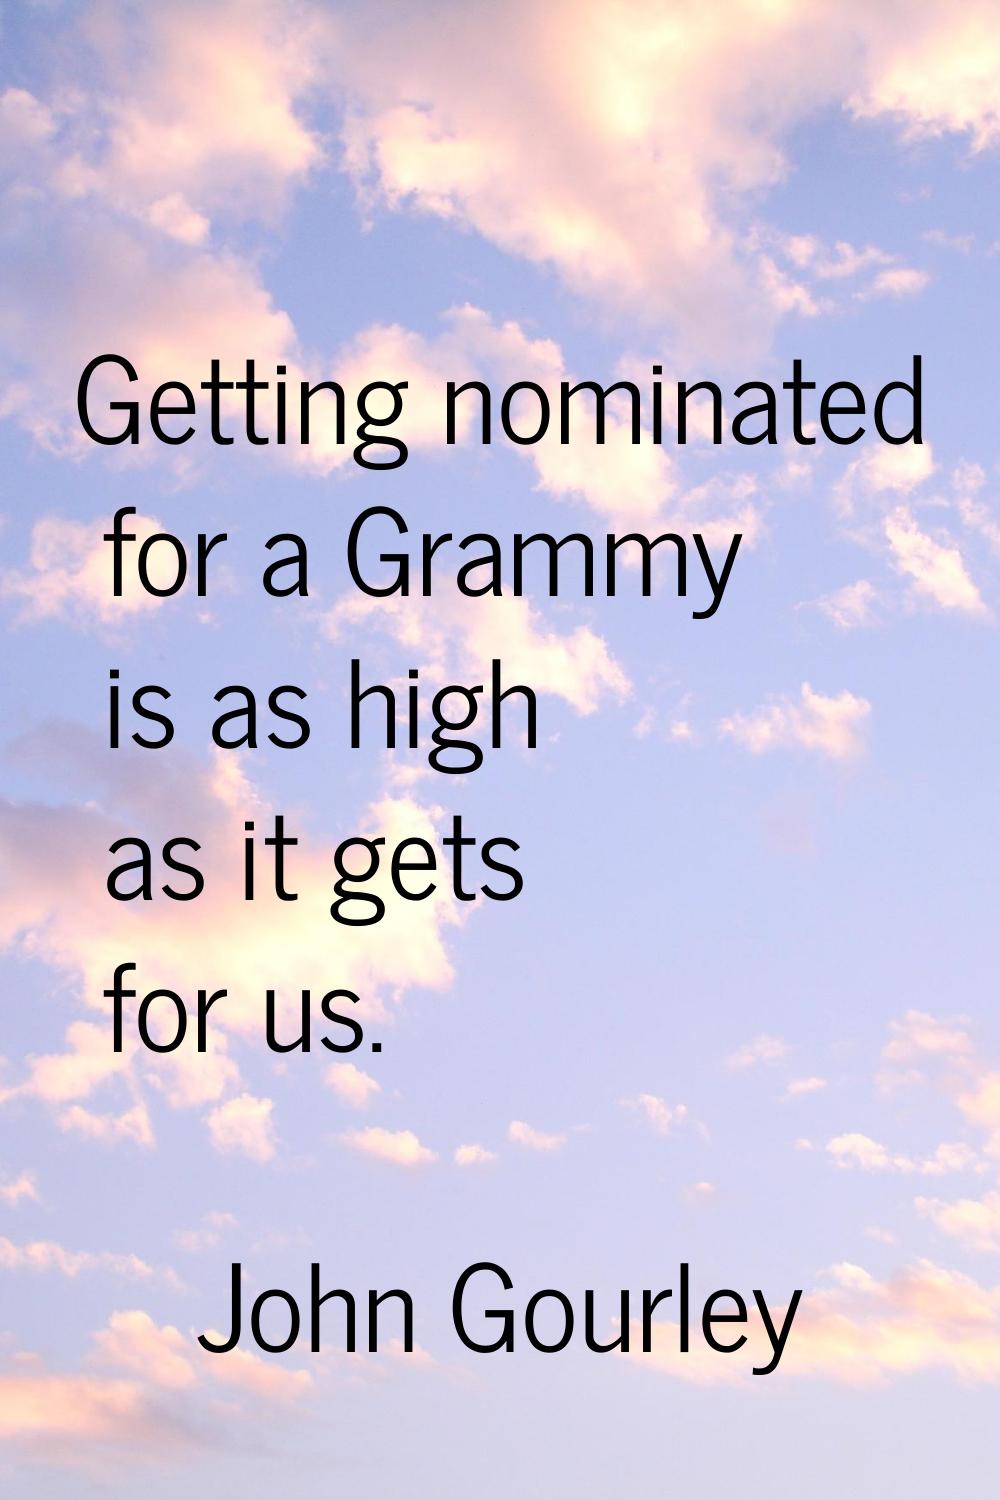 Getting nominated for a Grammy is as high as it gets for us.